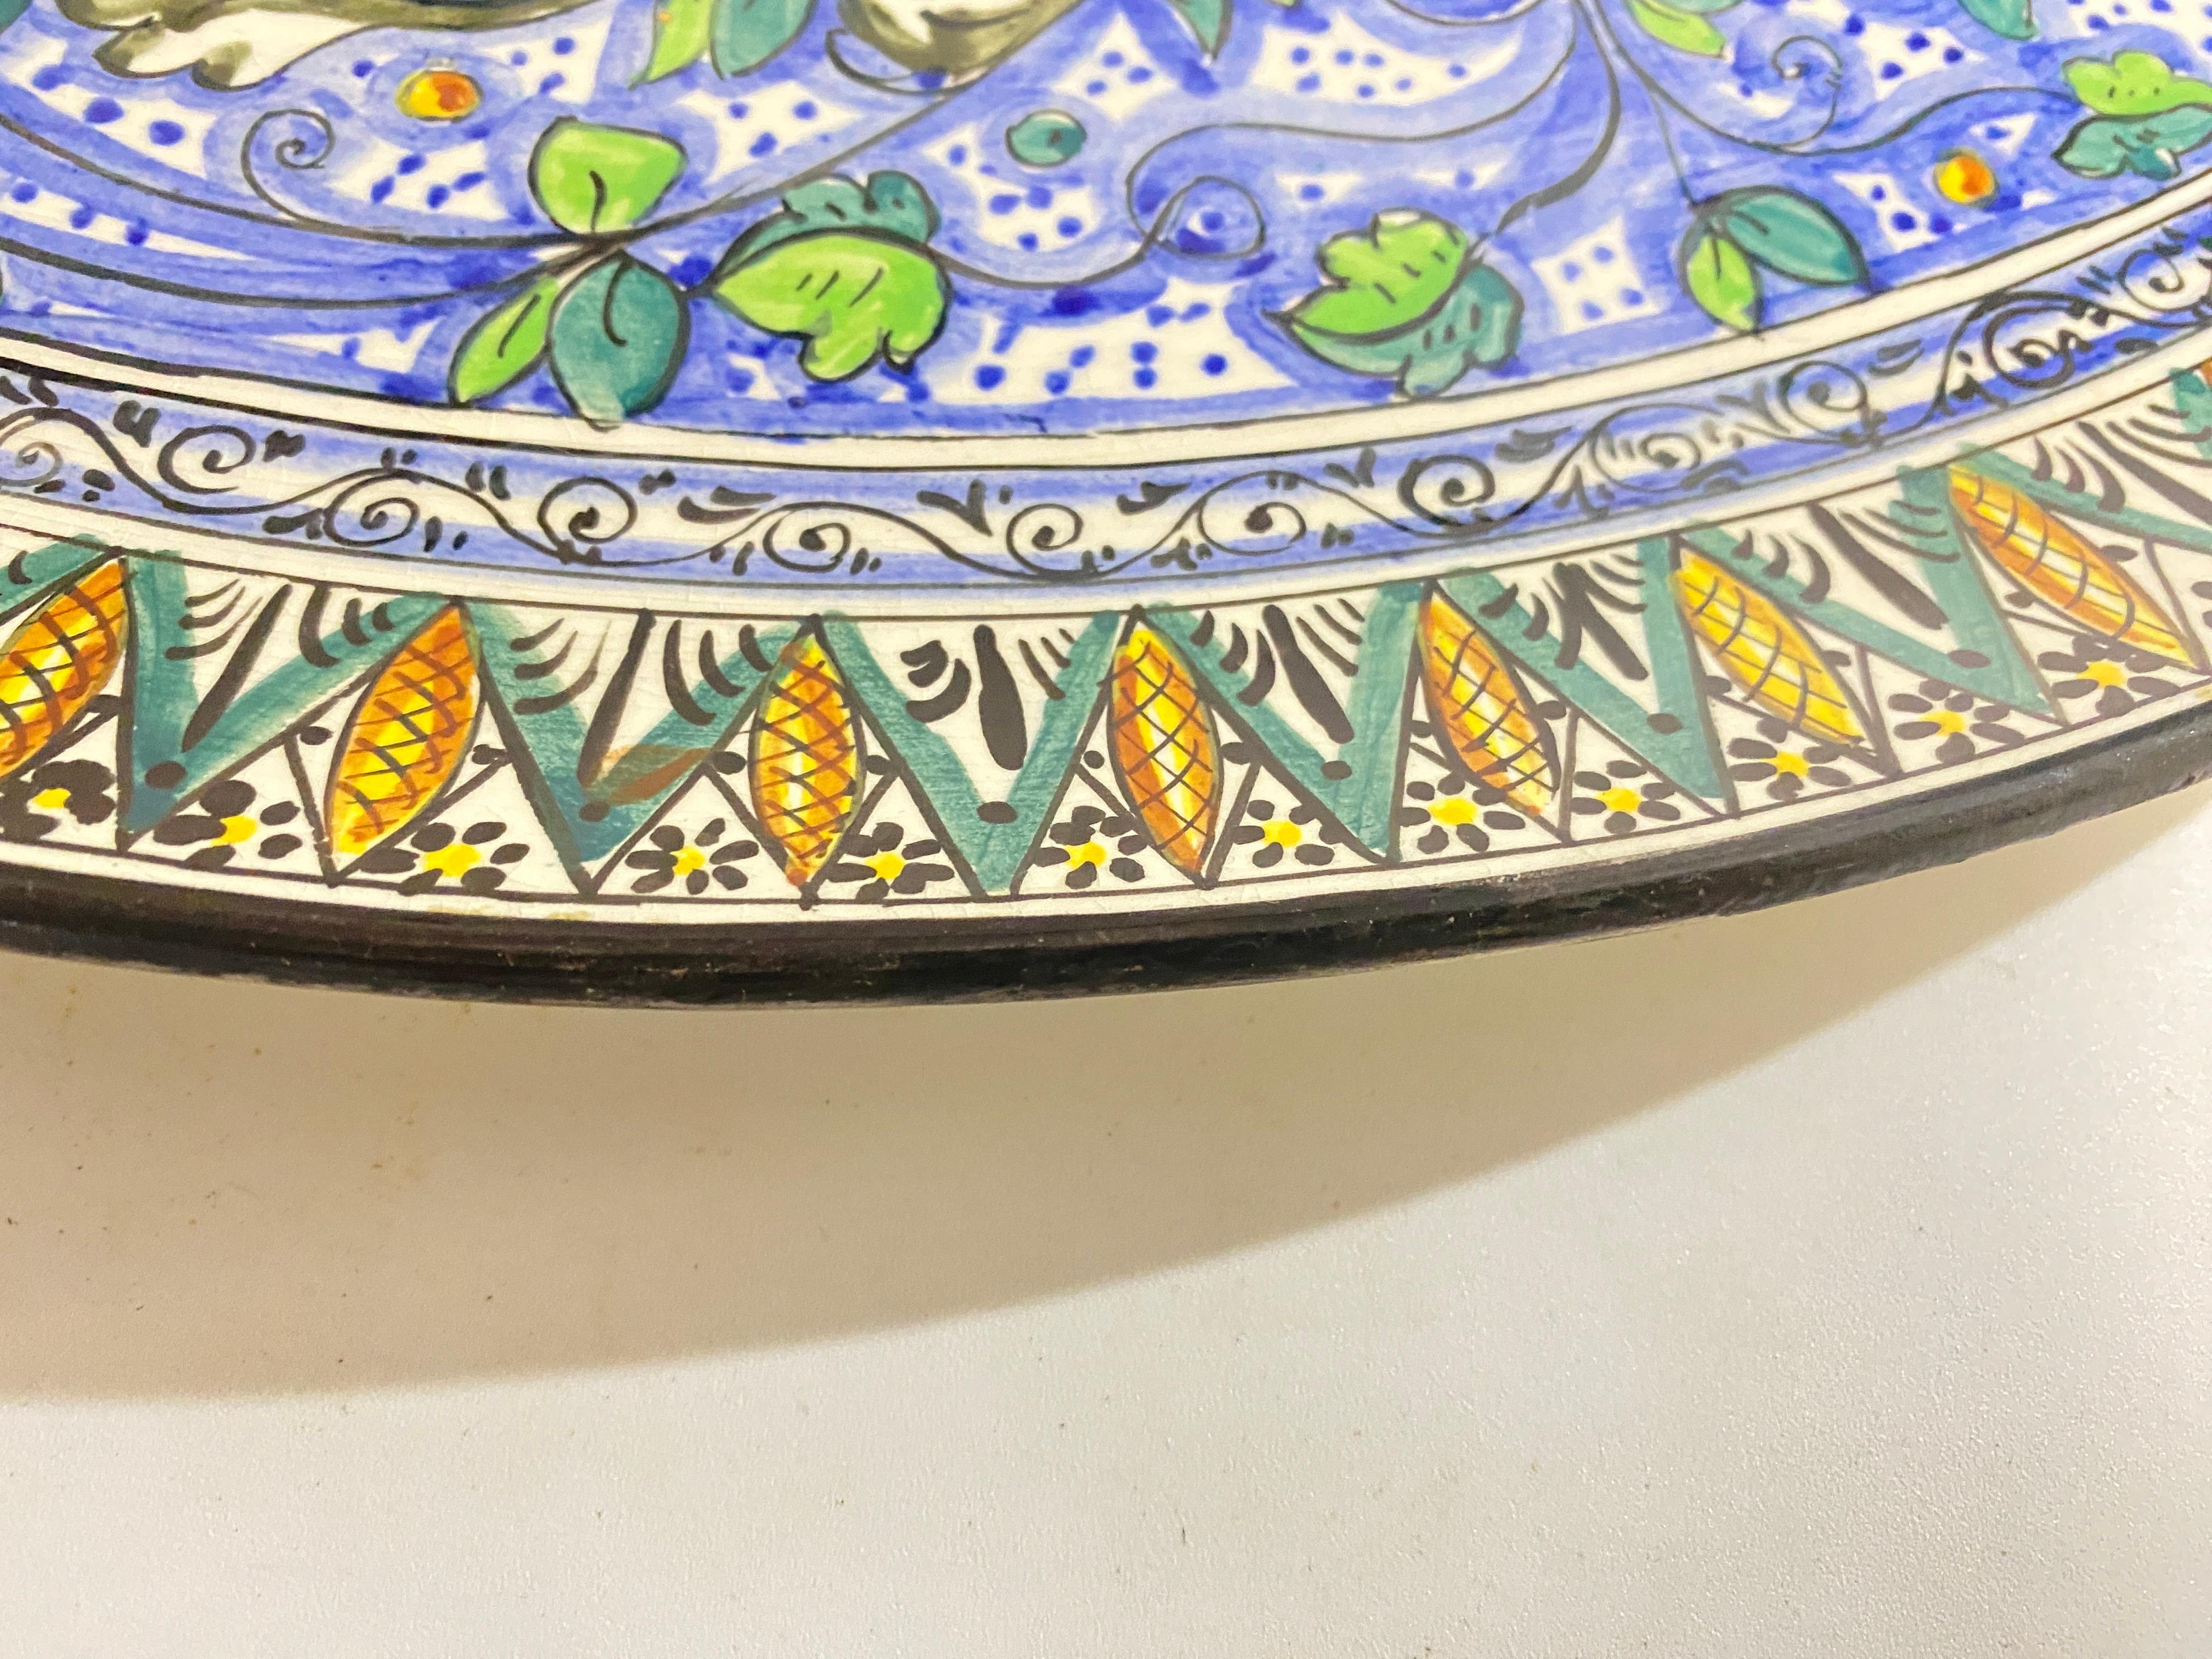 Extra Large Decorative Ceramic Dish Yellow an Blue Italy 20th Century C.Lombardo For Sale 1